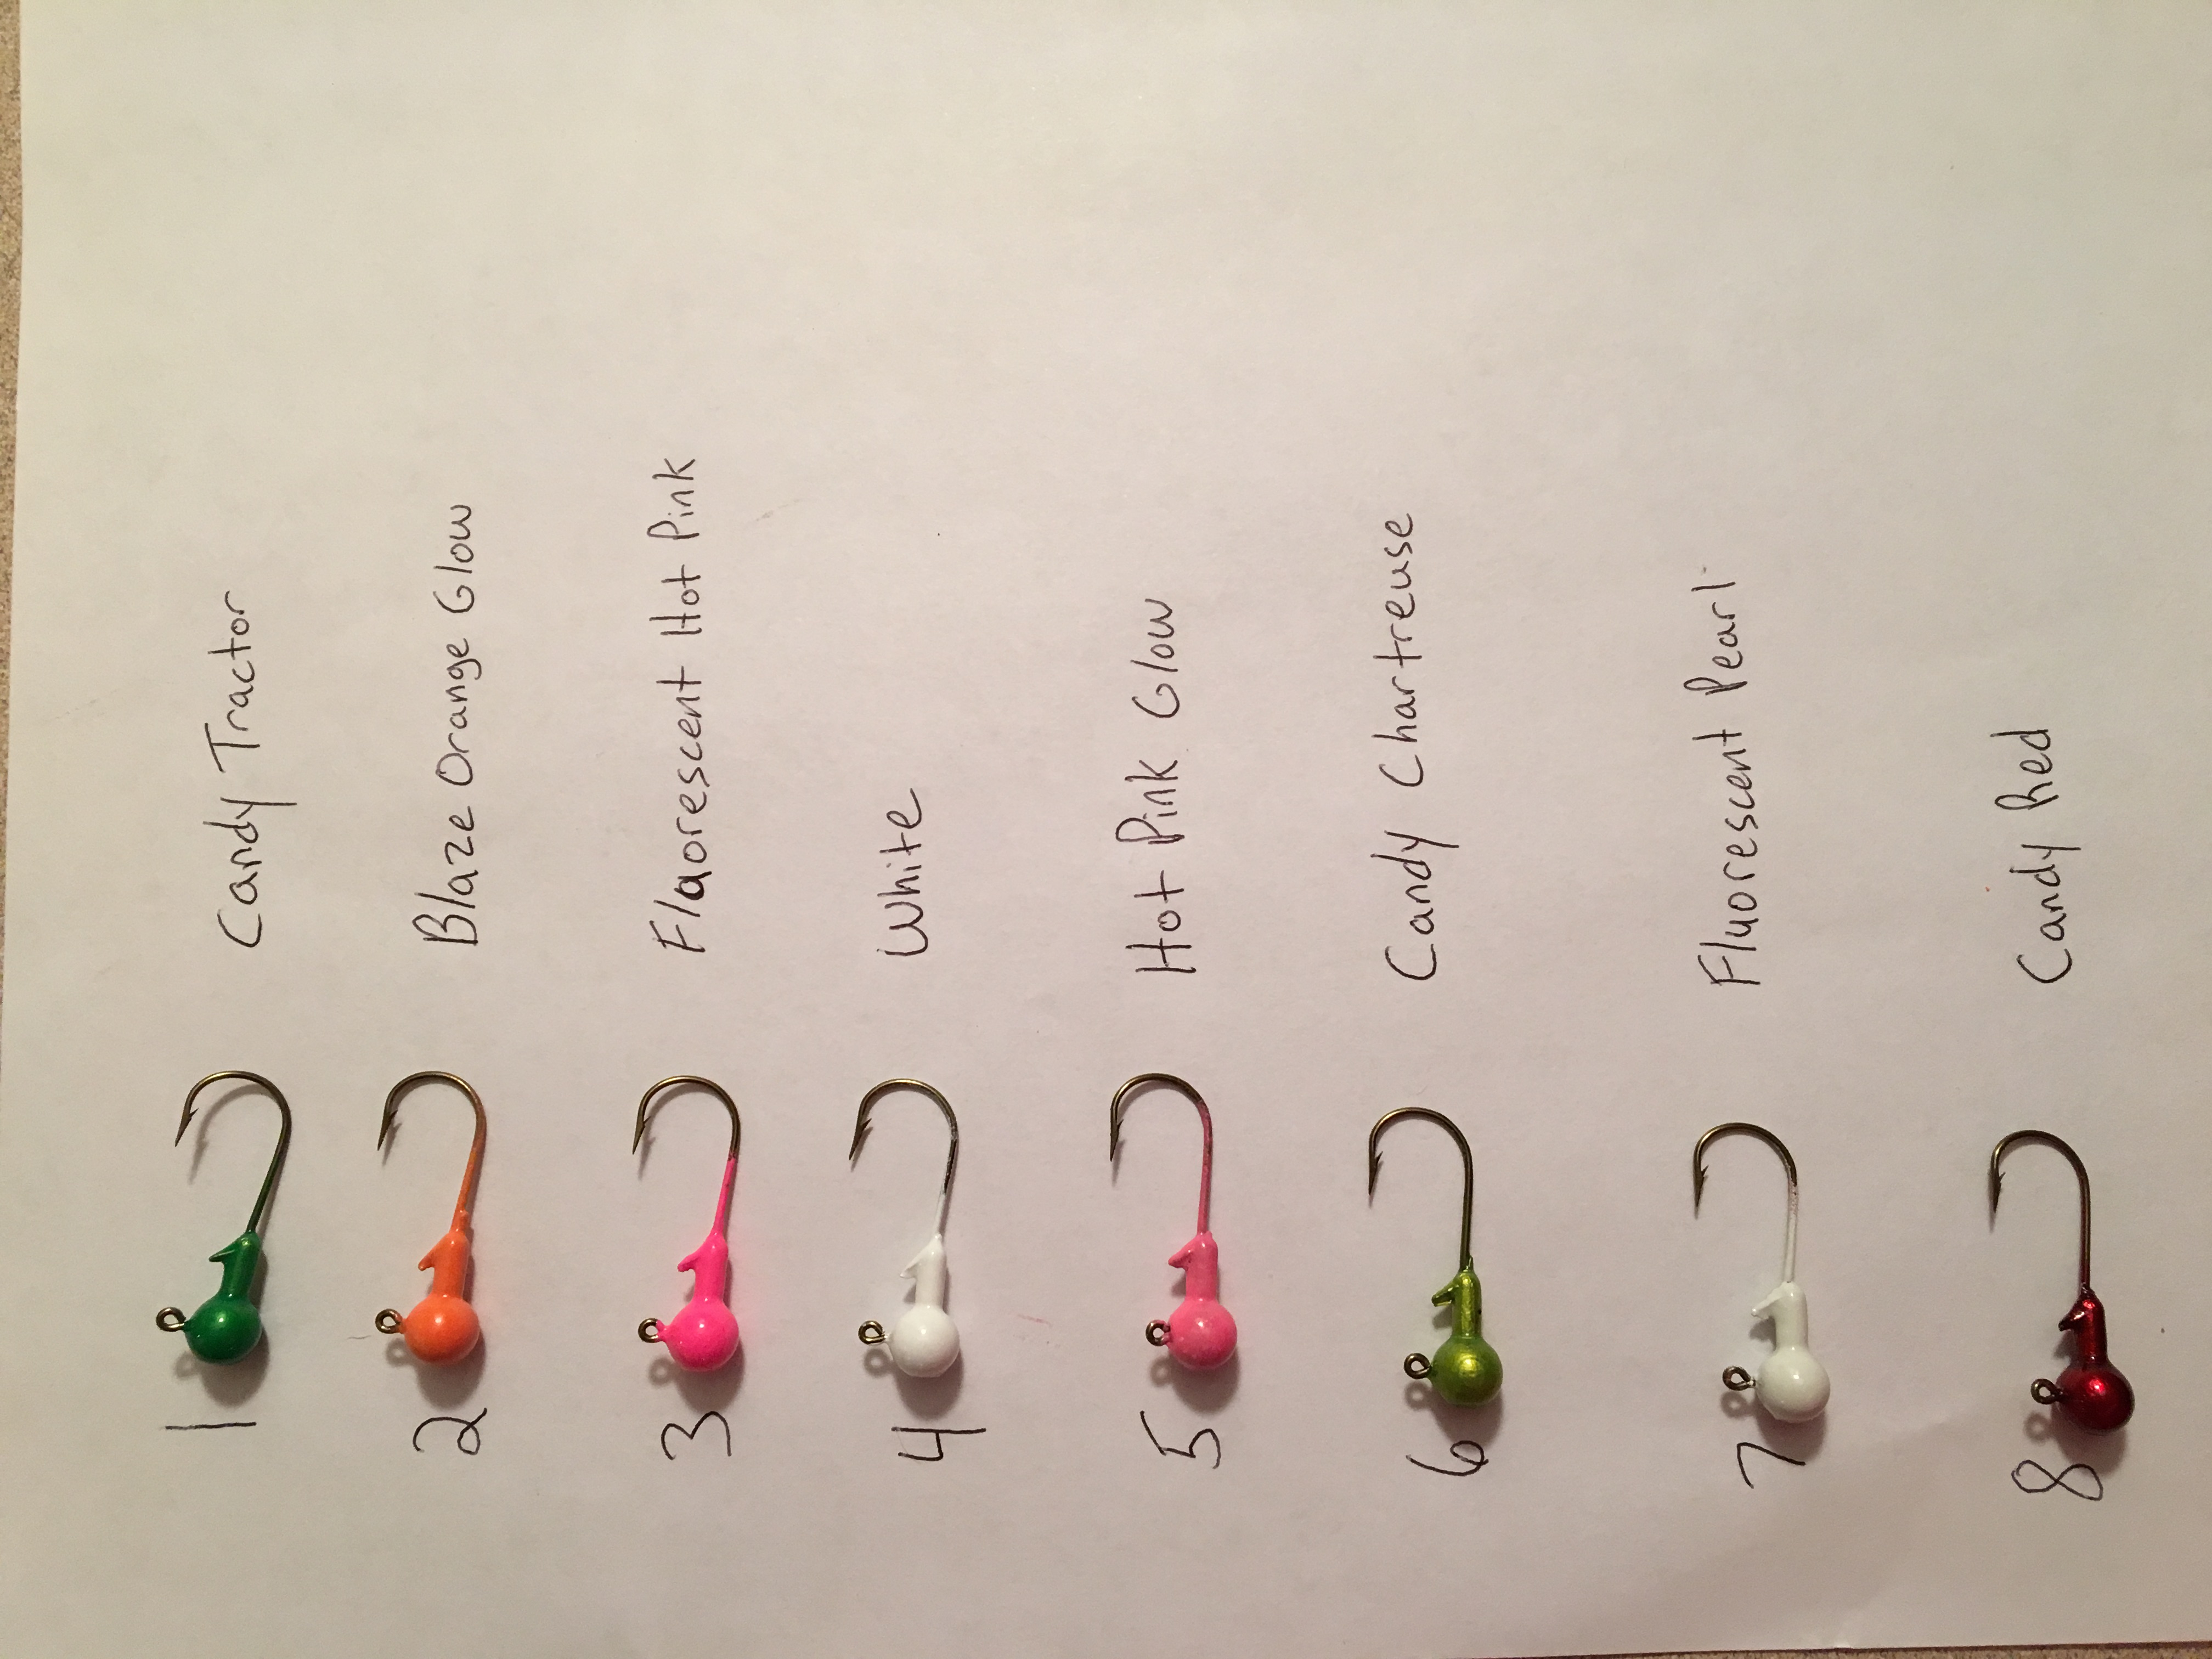 Homemade jigs and molds